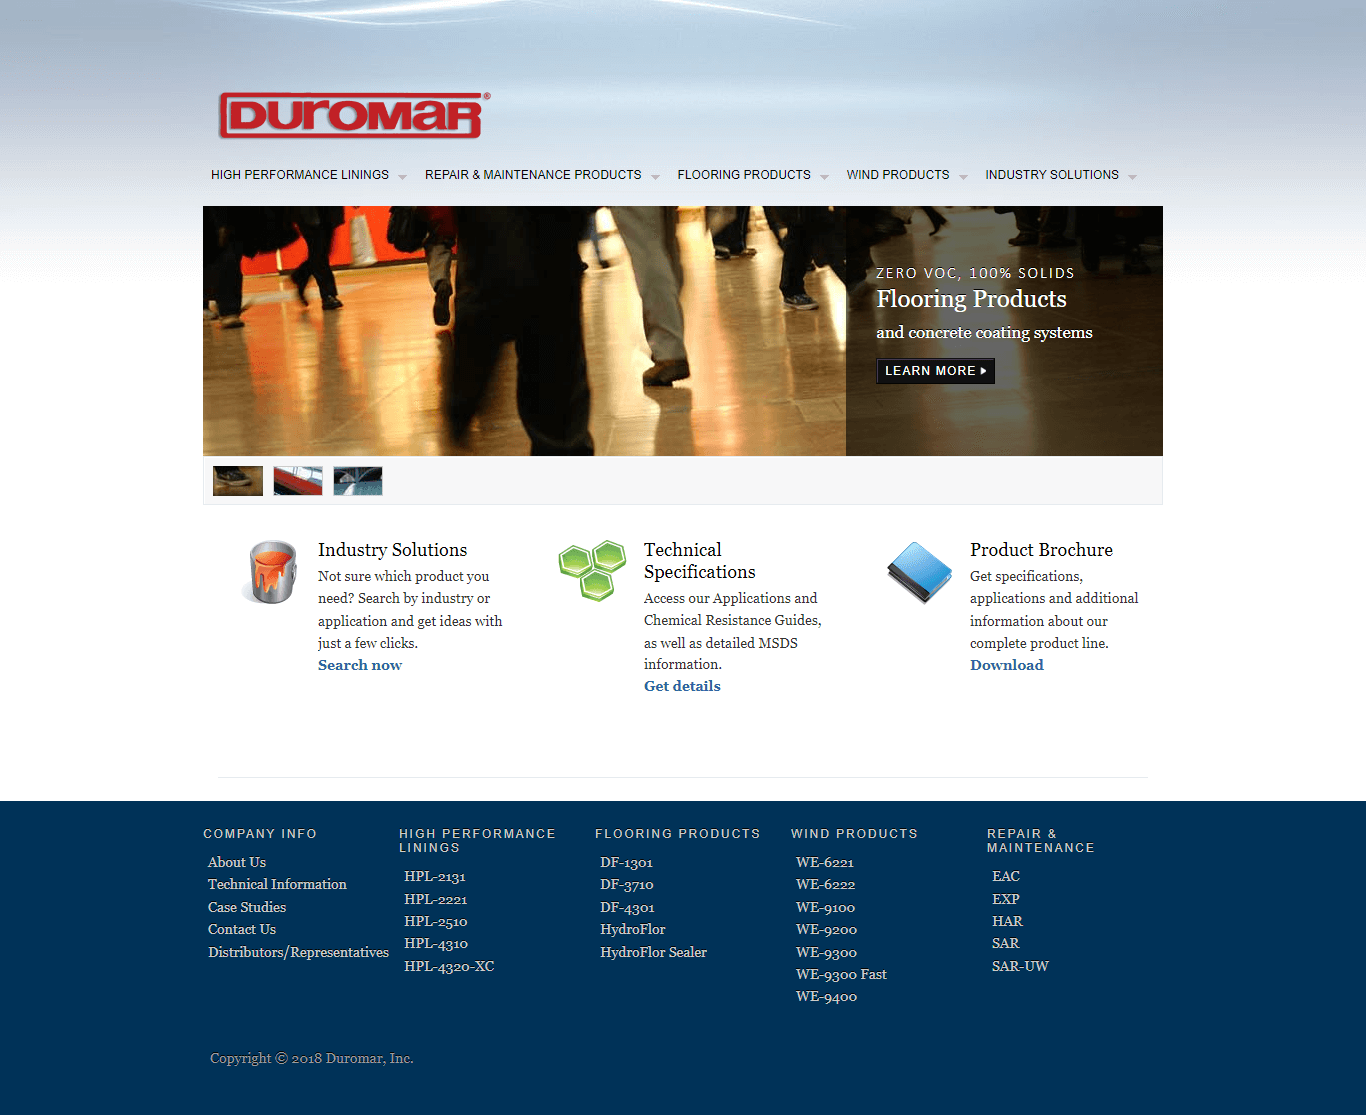 DUROMAR-Inc-Linings-and-Specialty-Coatings-Zero-VOC-100-Solids (1)